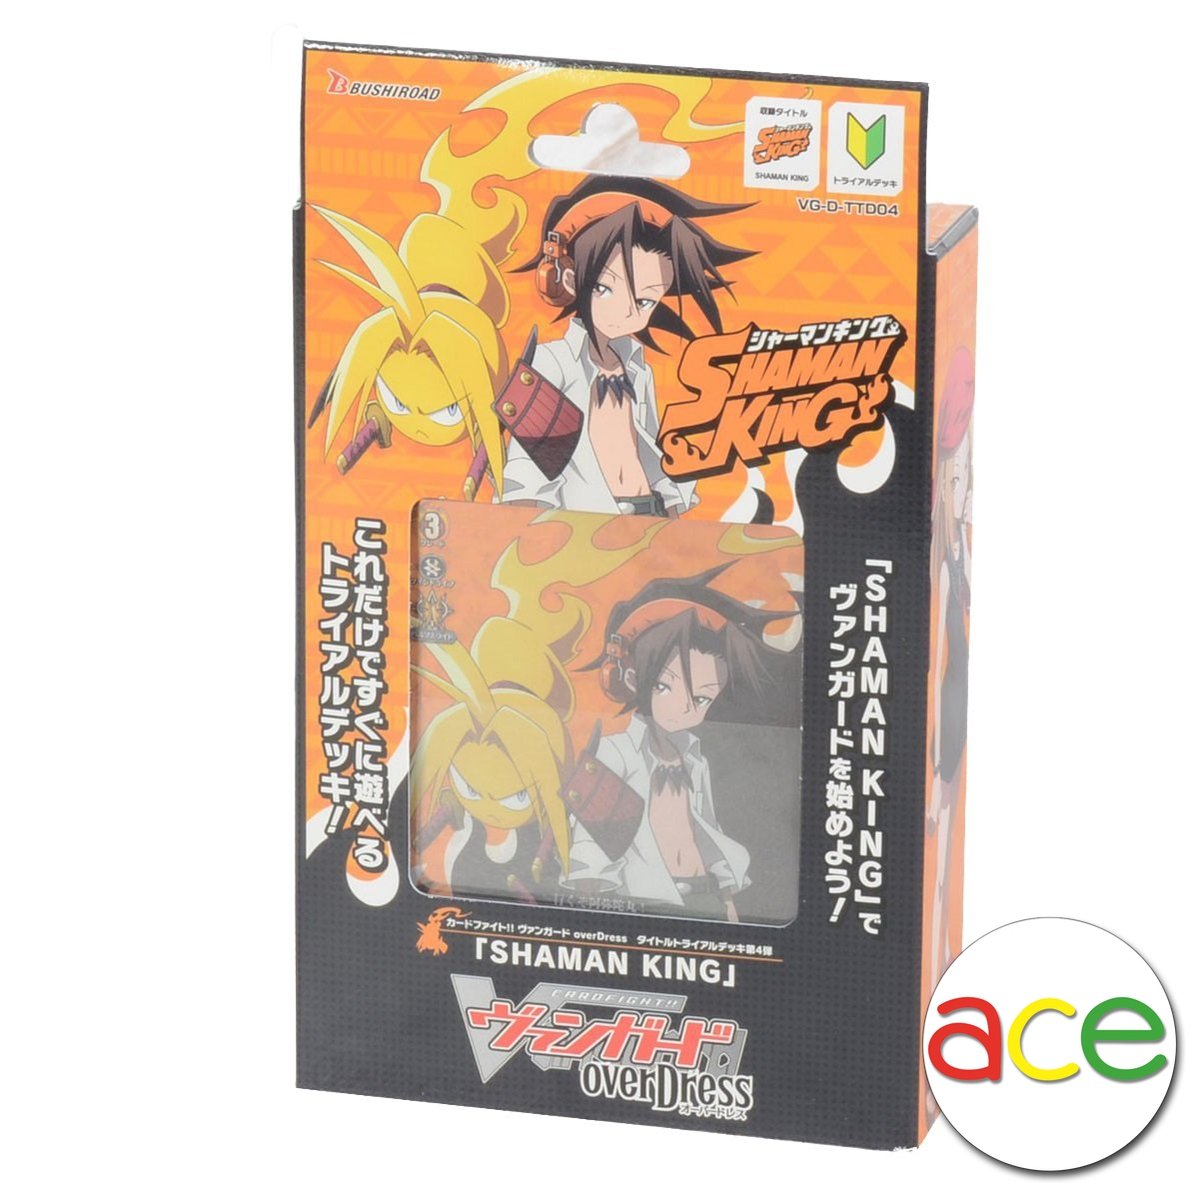 Cardfight Vanguard overDress Title Trial Deck 4th "SHAMAN KING" [VG-D-TTD04]] (Japanese)-Bushiroad-Ace Cards & Collectibles